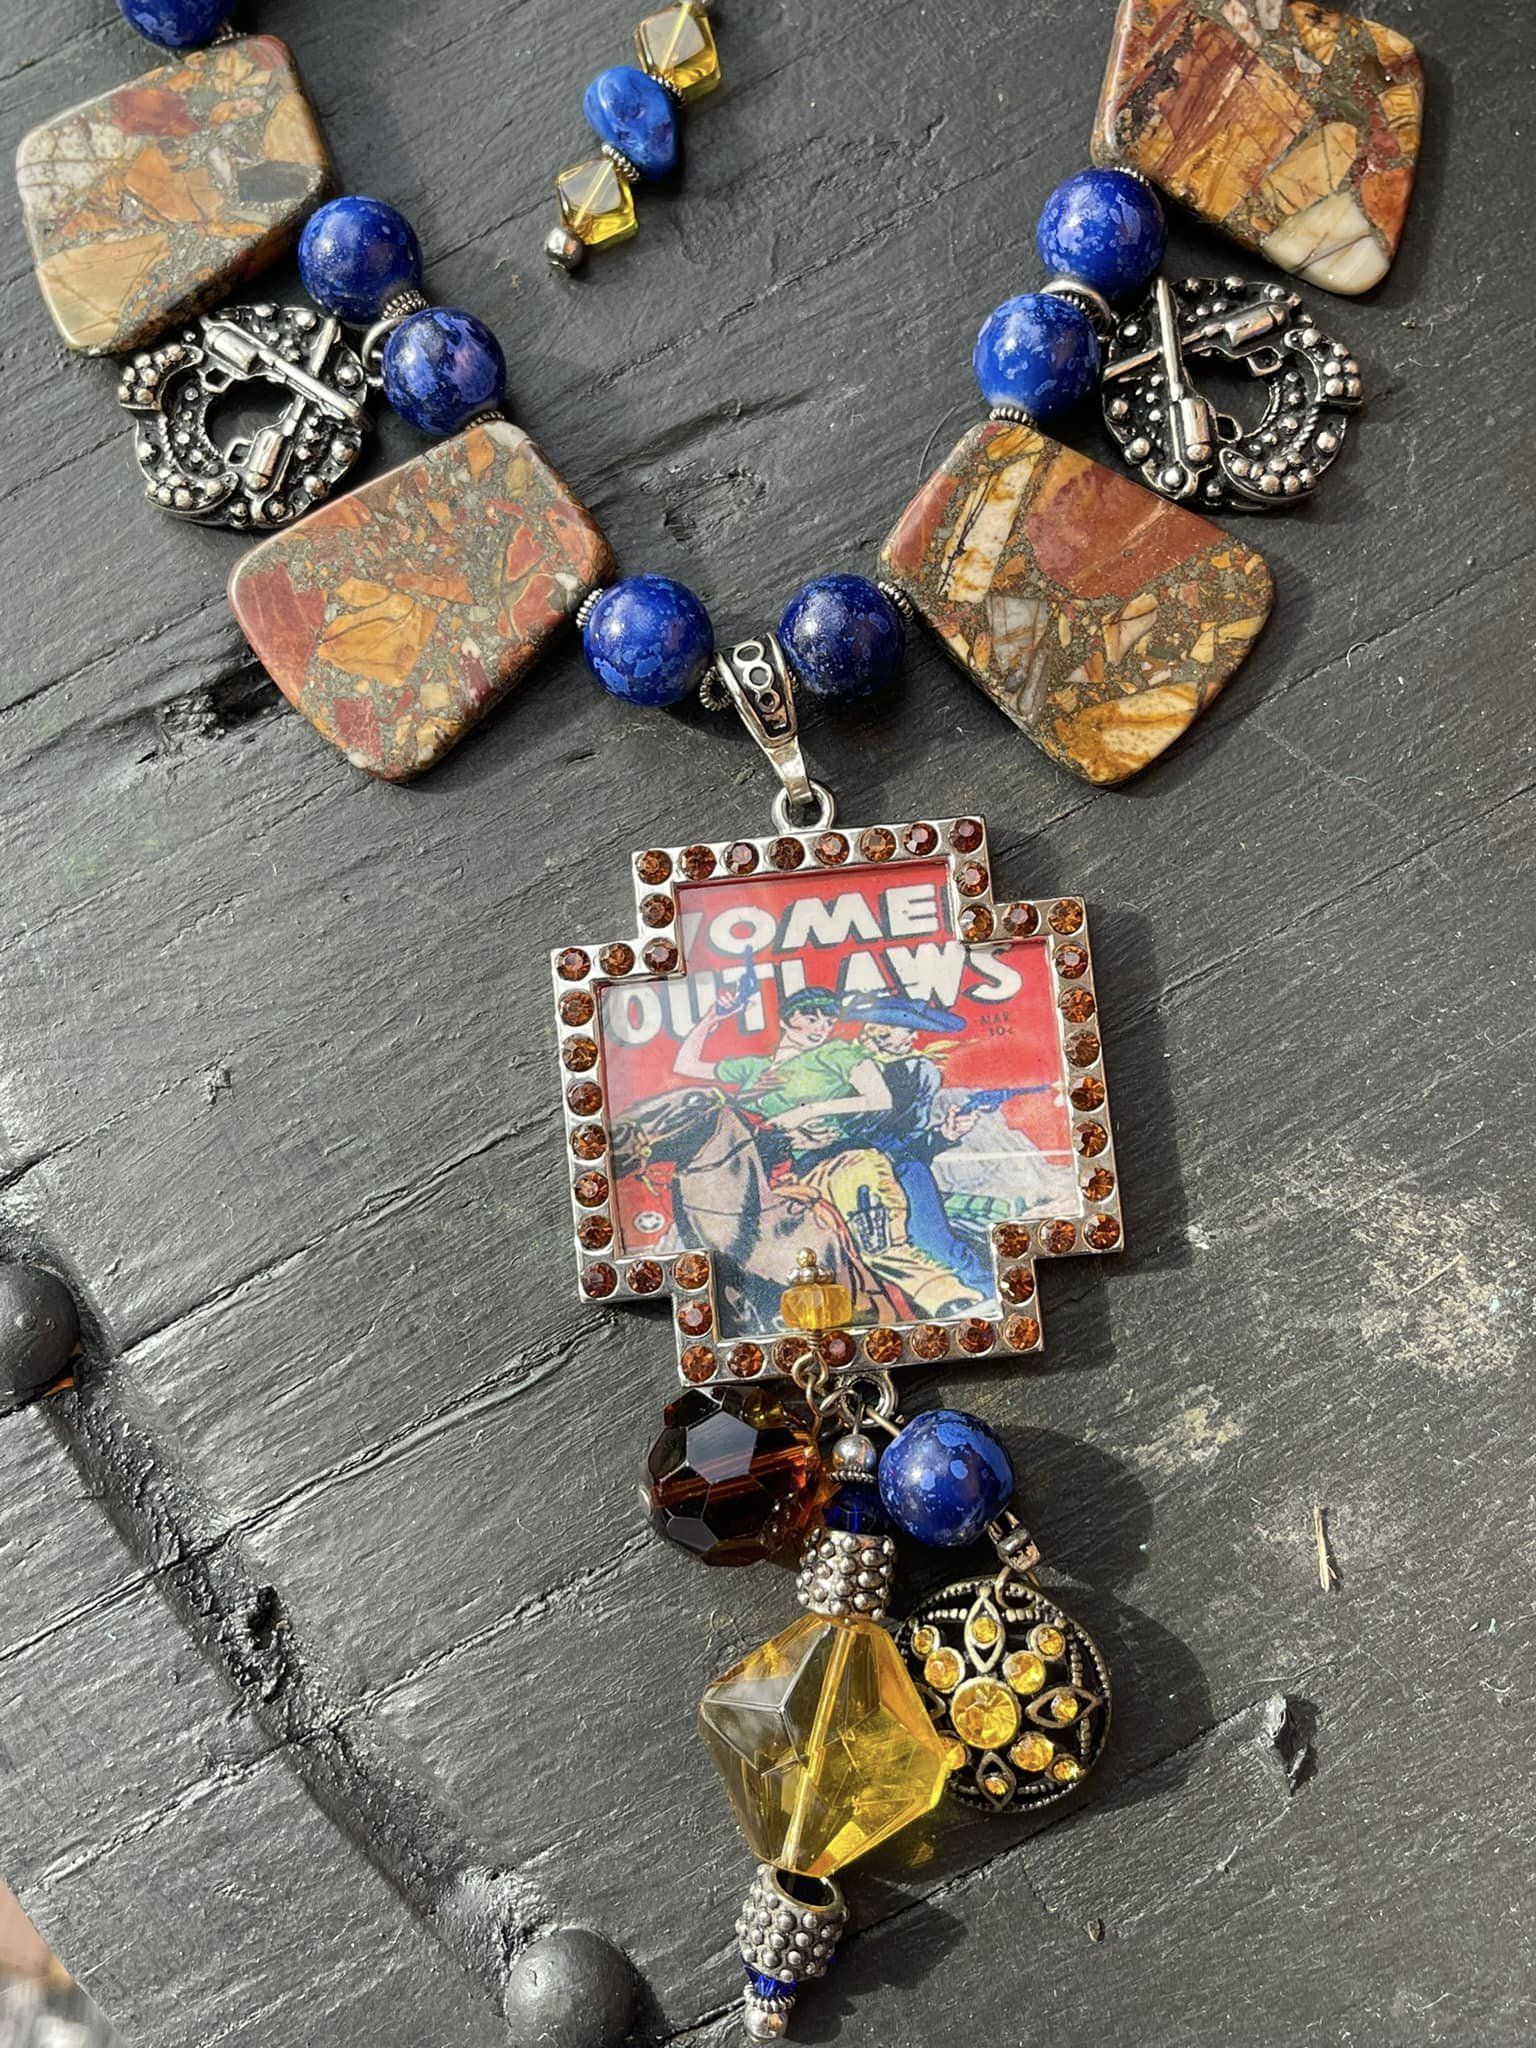 WOMEN OUTLAW NECKLACE Handmade Blue & Brown Jasper Gemstone Yellow Crystal Brown Yellow Beaded Sixshooter Charm Long Silver Western Pendant Necklace